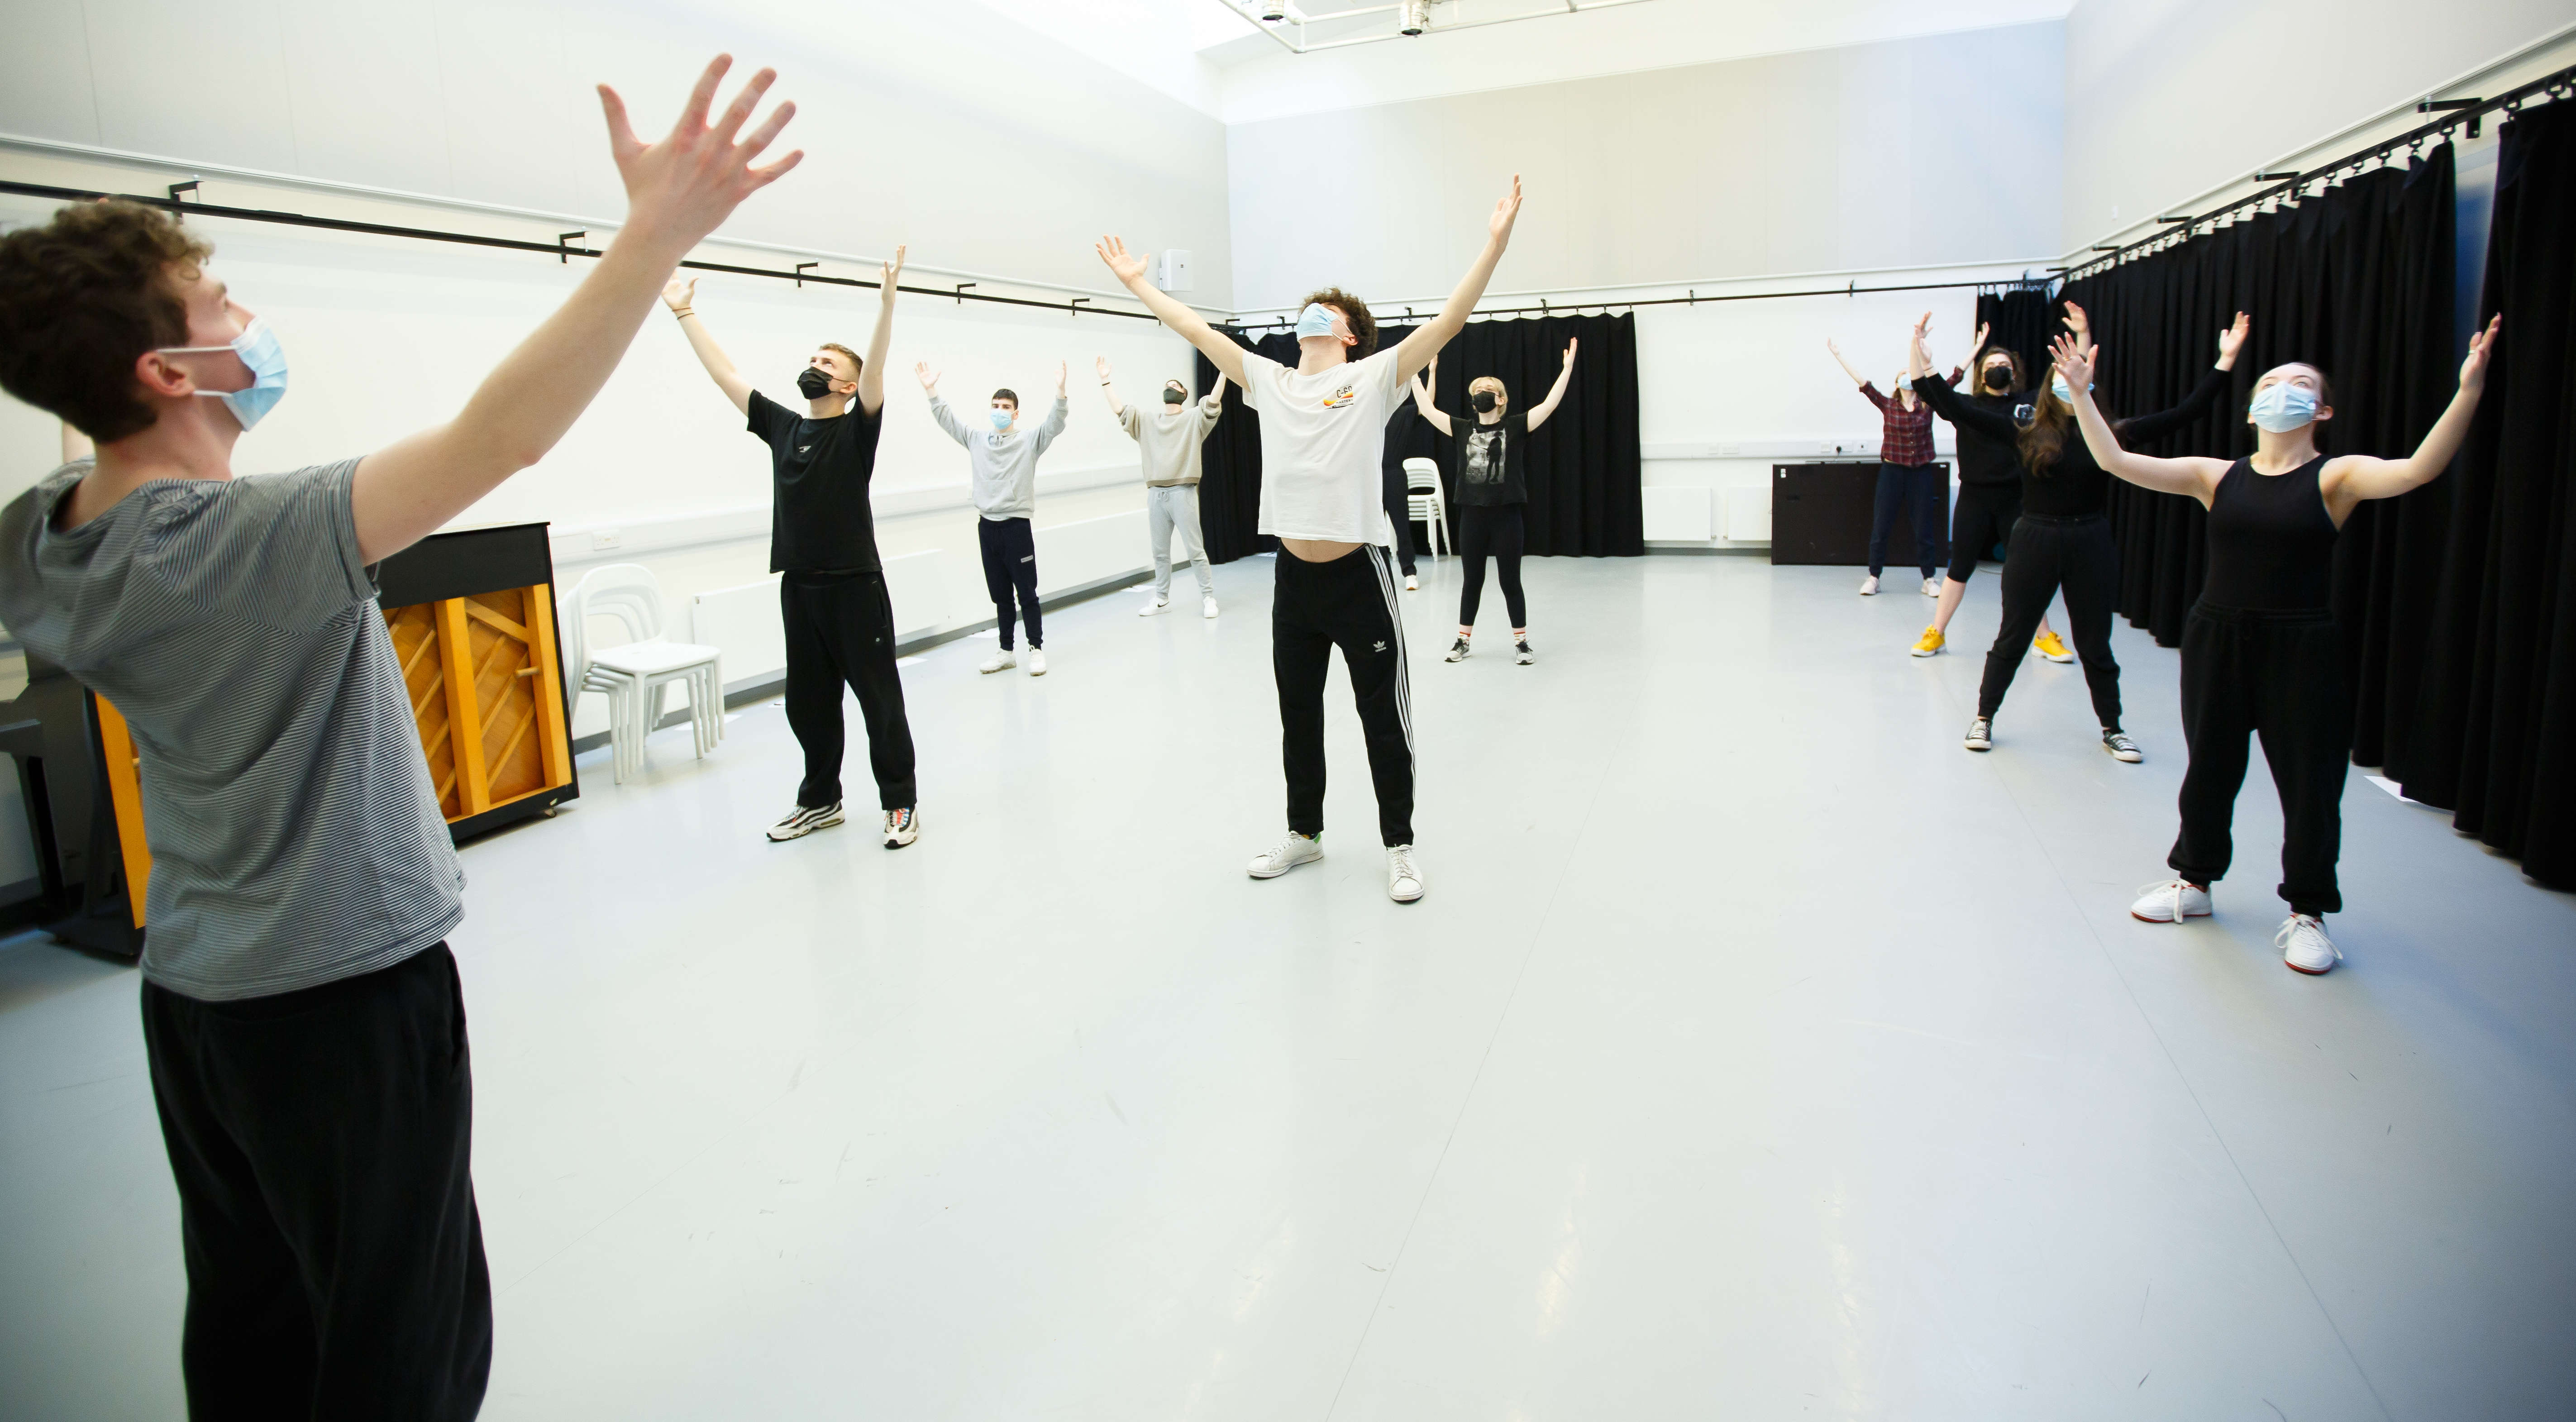 Room of people in drama studio stretching hands to the sky